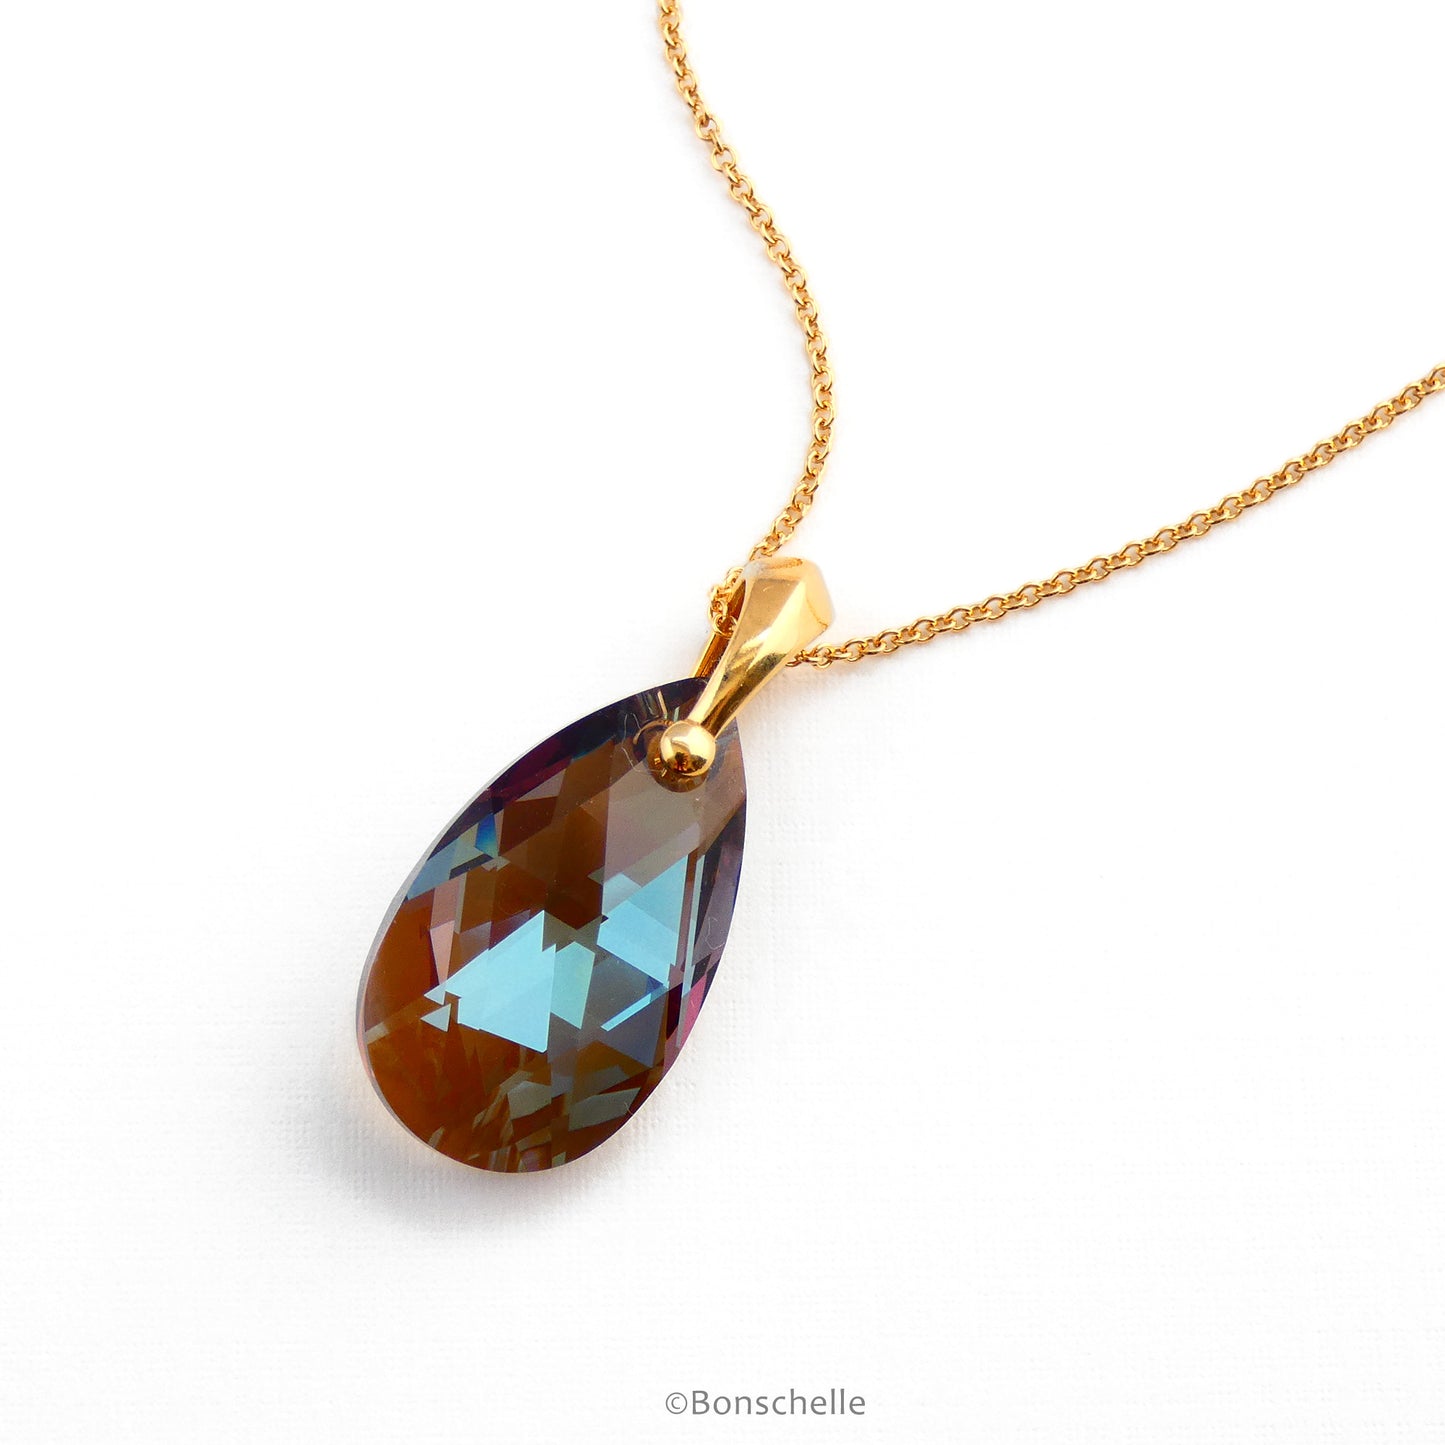 Alternate view of a handmade necklace with a teardrop shape bronze toned cut glass crystal bead and 14K gold filled chain